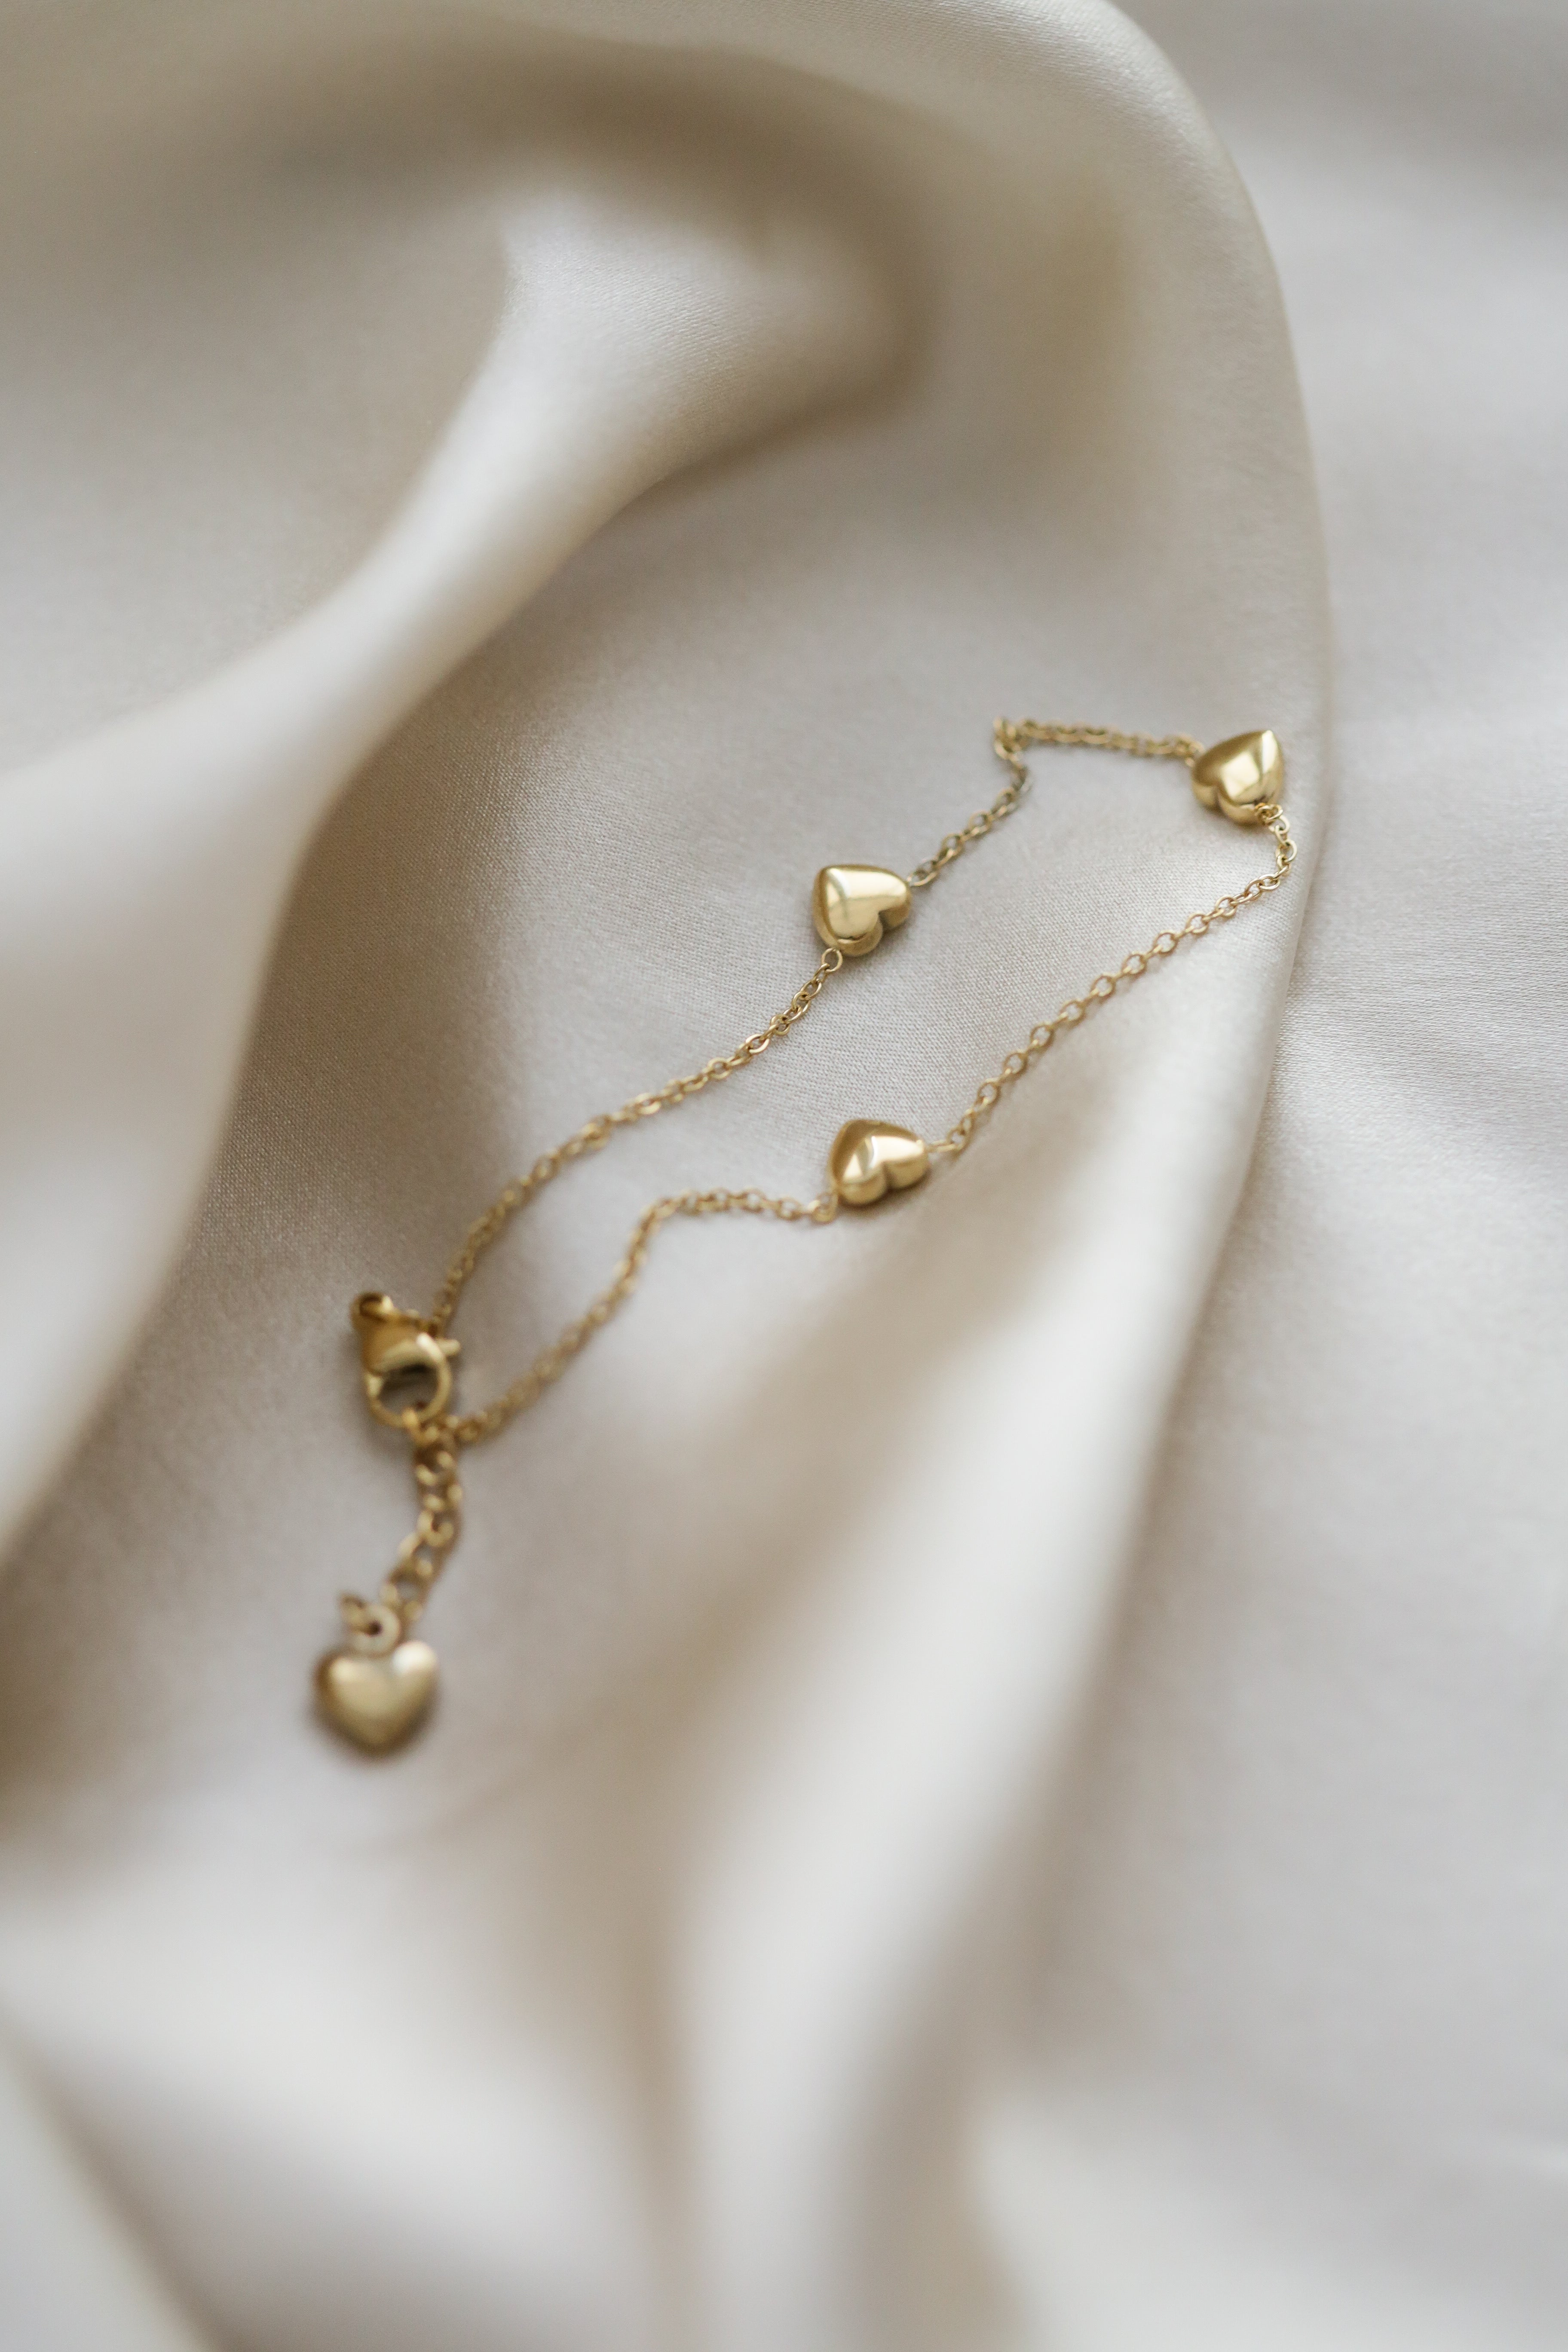 The Heart - Trio Bracelet - Boutique Minimaliste has waterproof, durable, elegant and vintage inspired jewelry